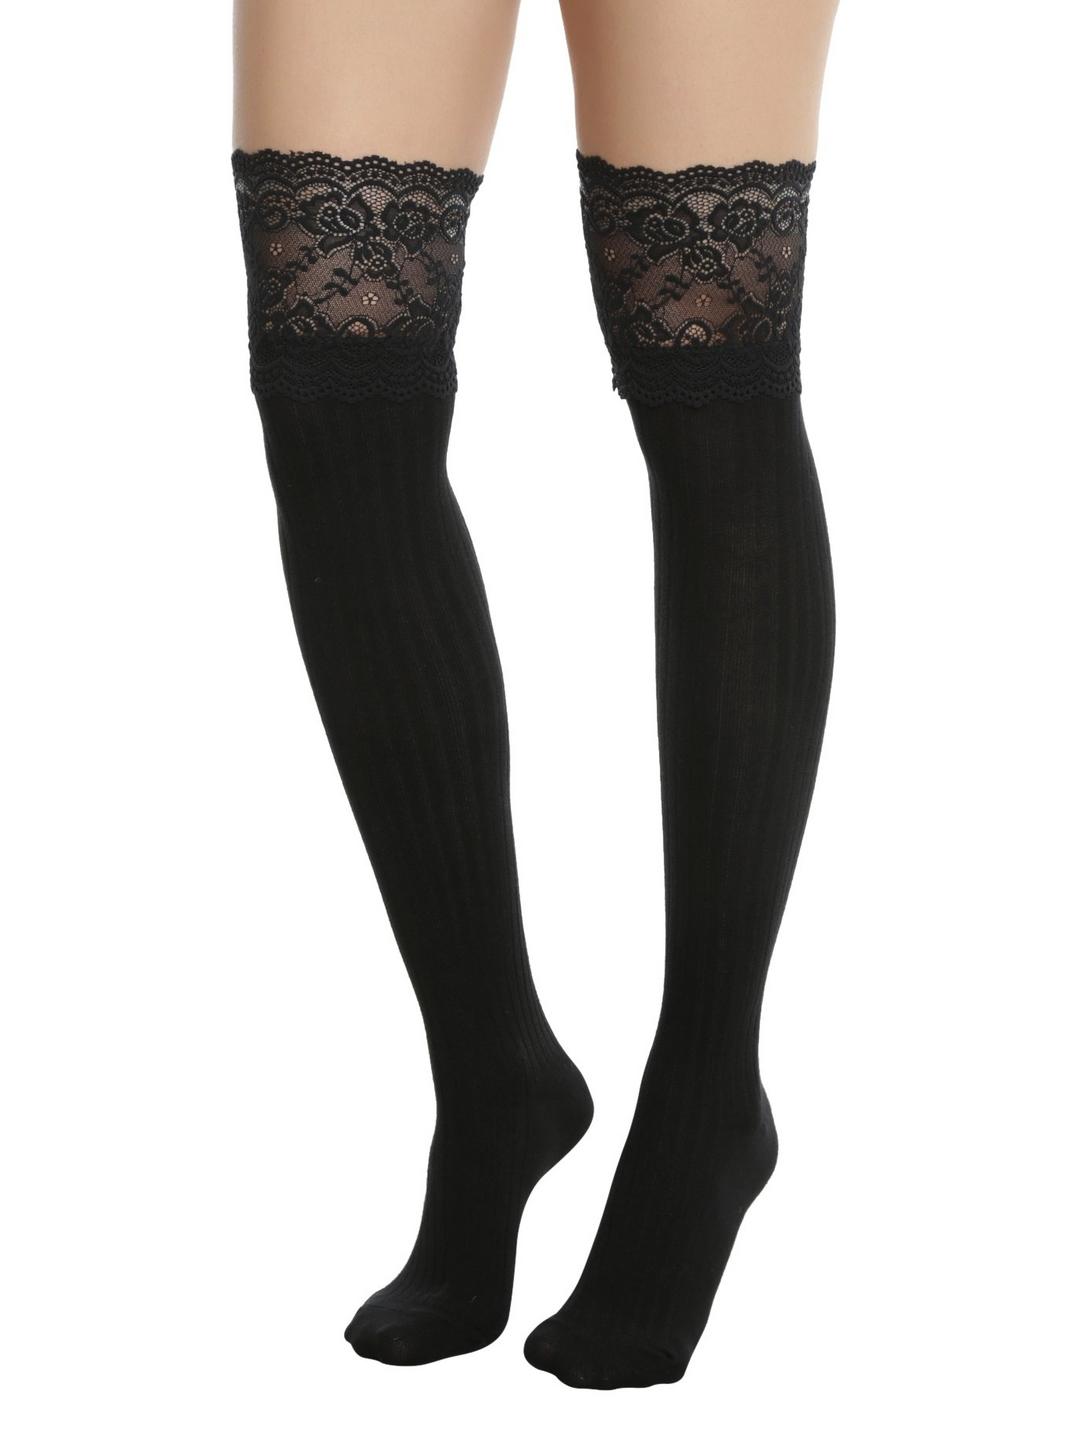 Blackheart Black Lace Cuff Ribbed Over-The-Knee Socks, , hi-res